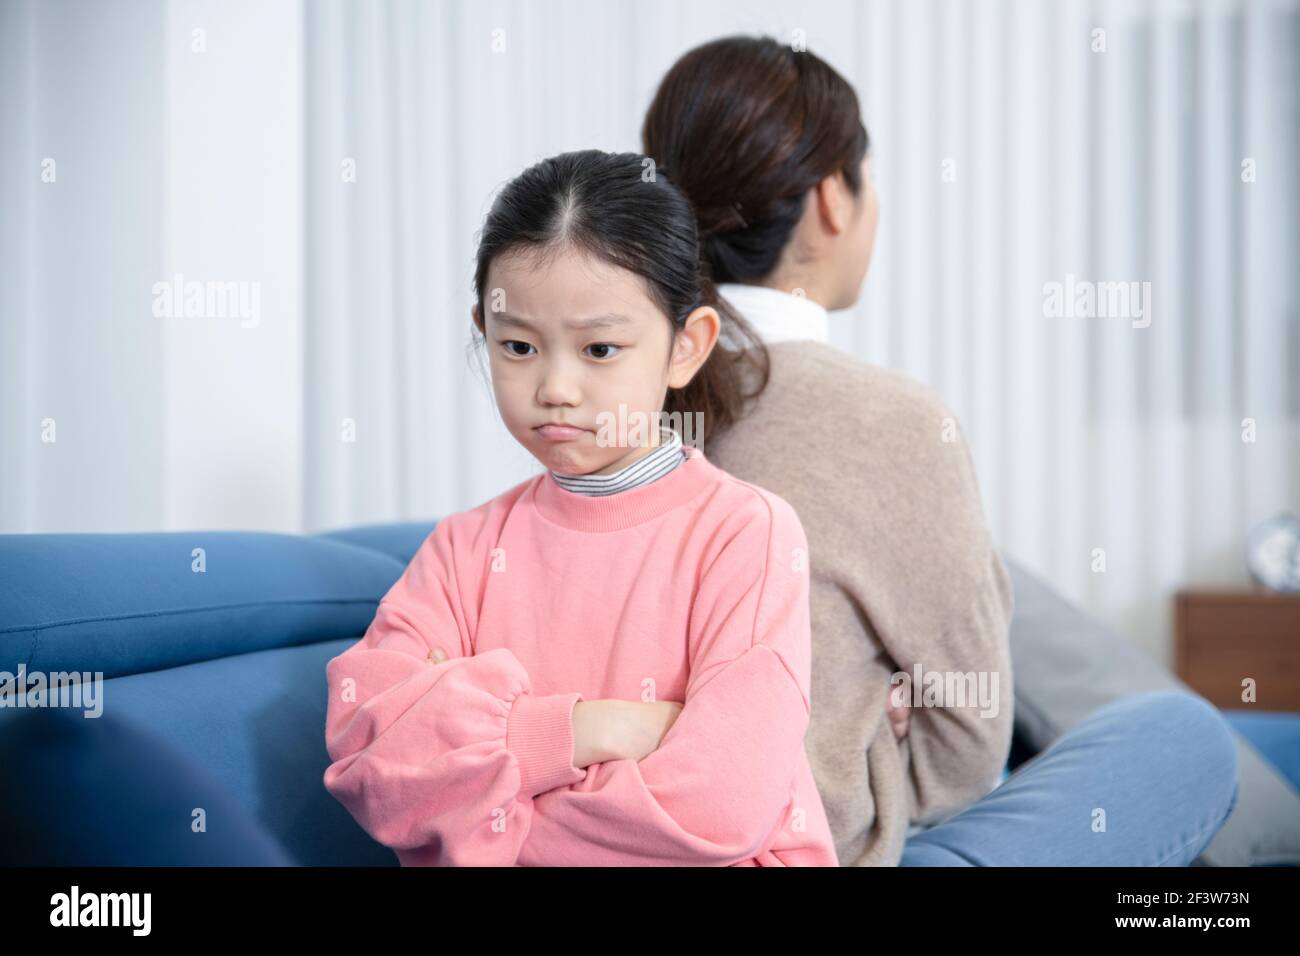 Asian mom and daughter concept with miscommunication, troubles, fight Stock Photo